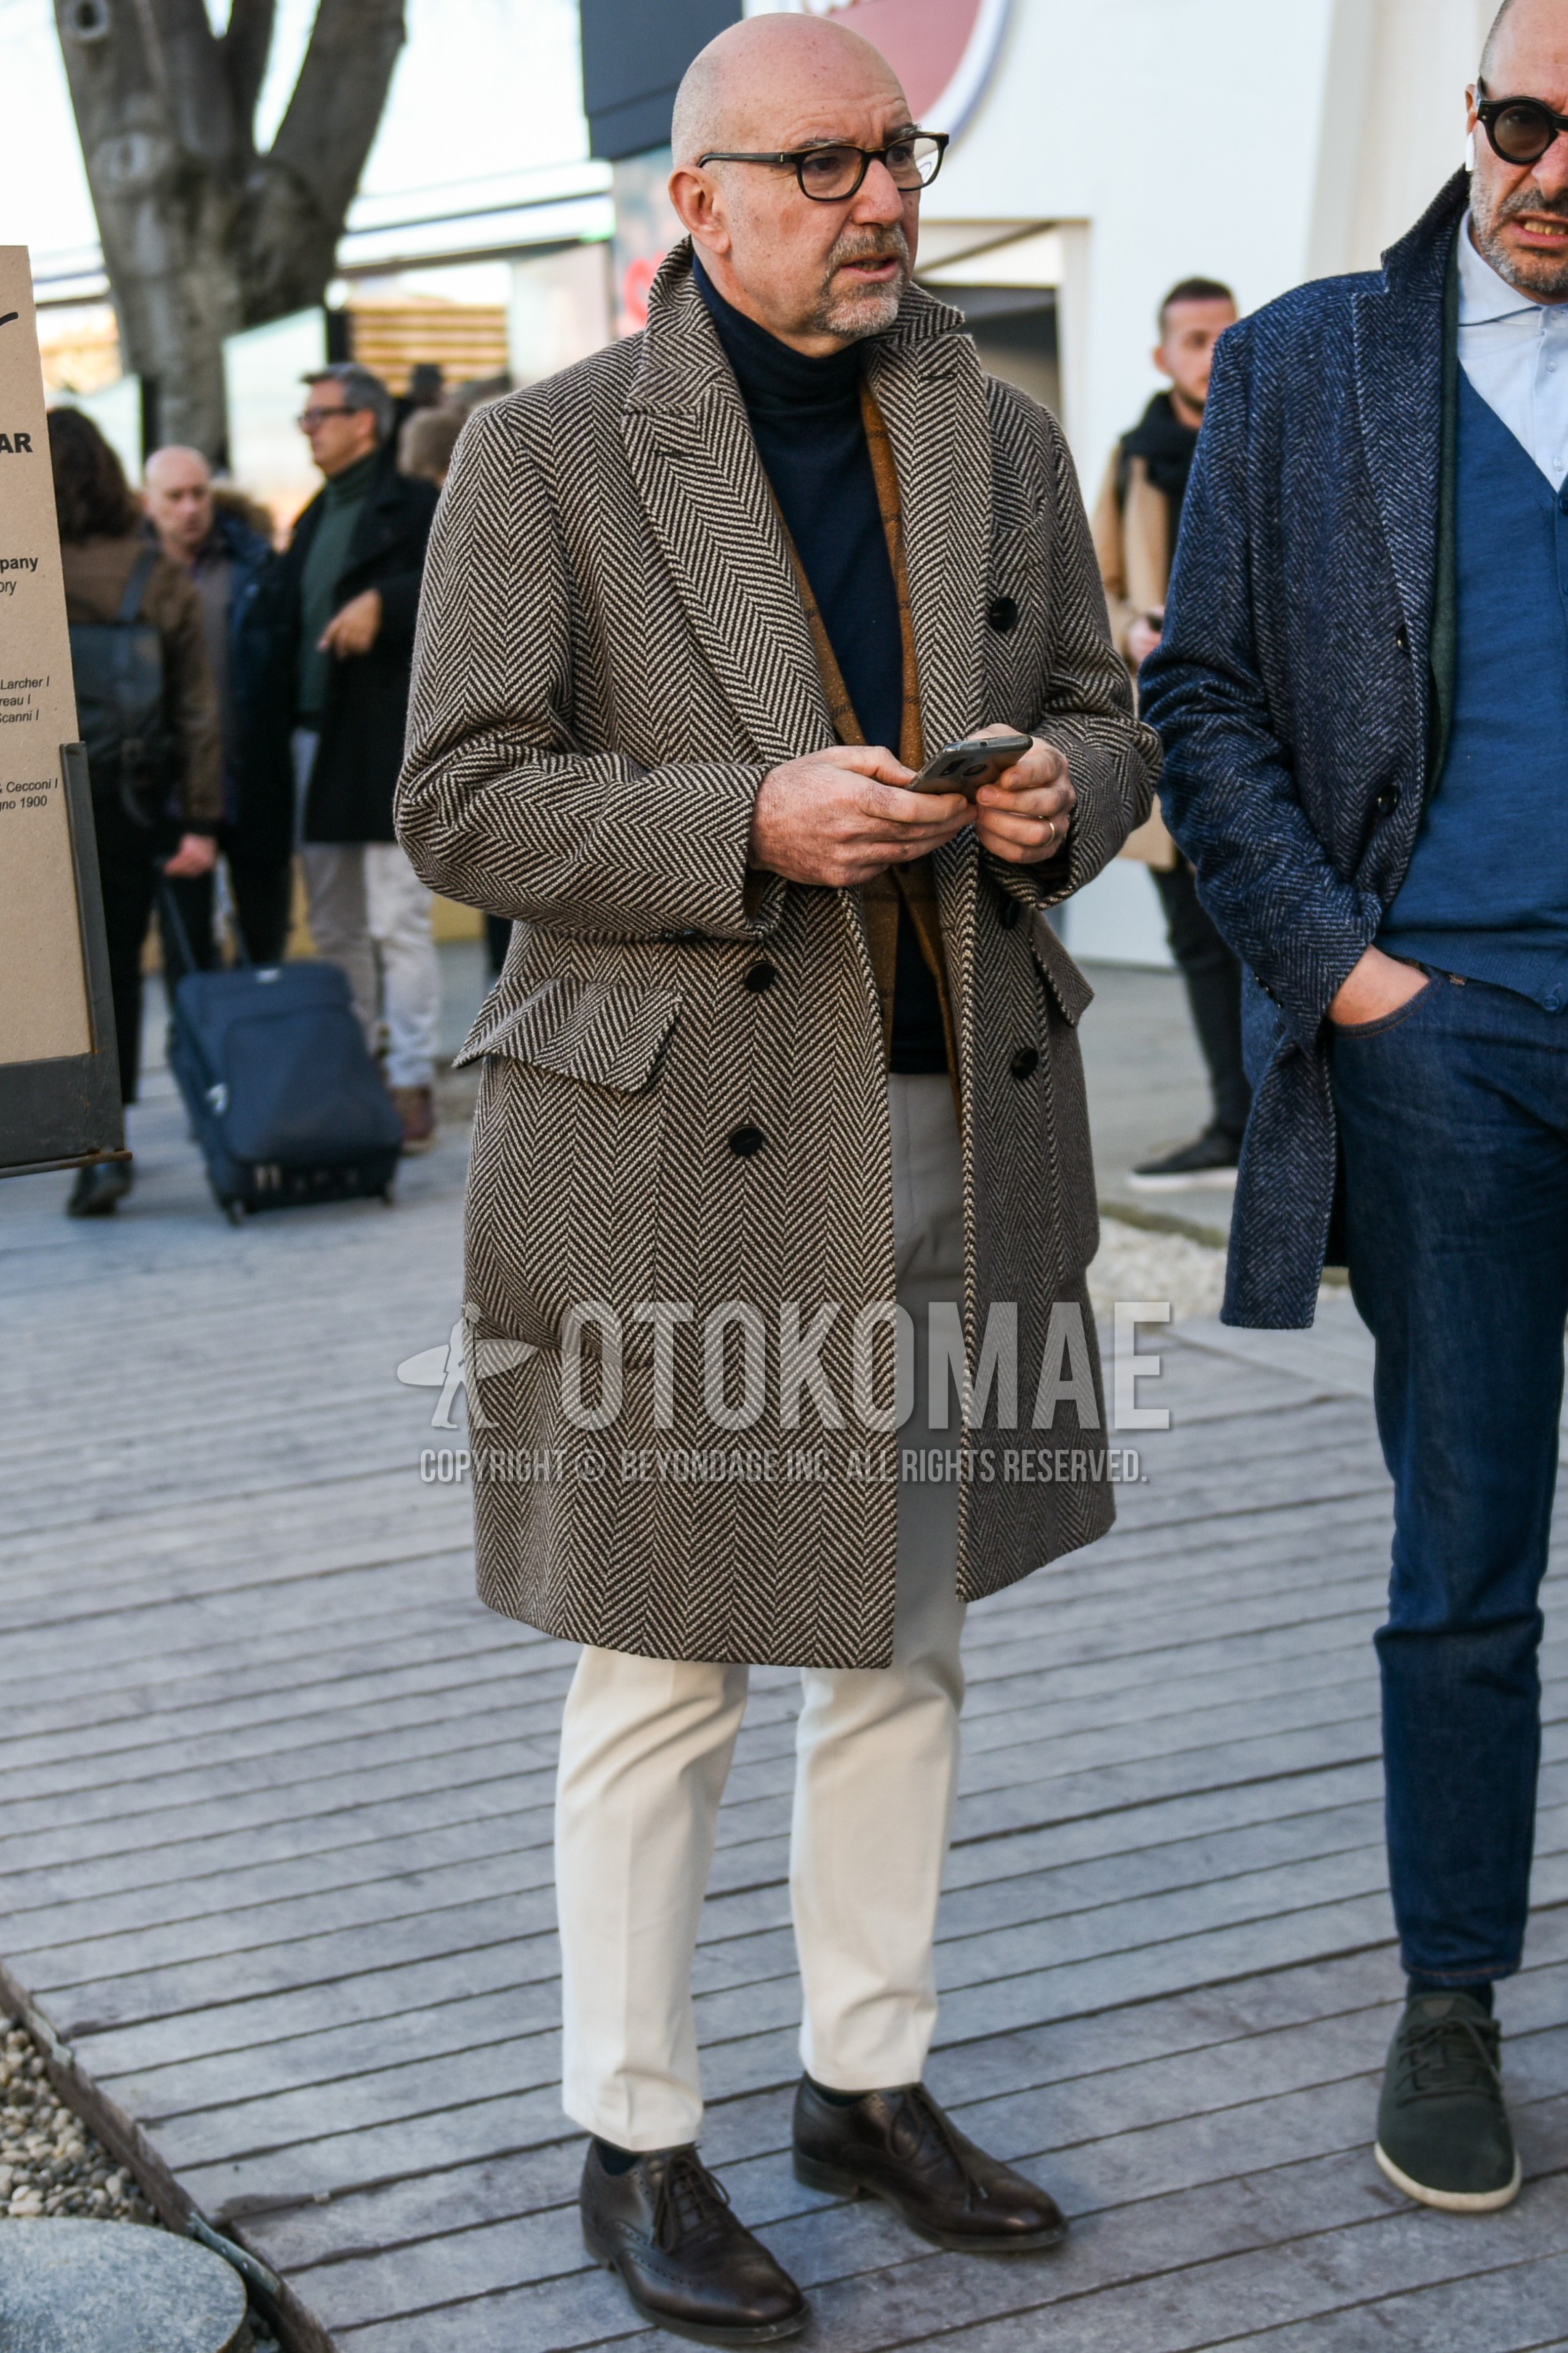 Men's autumn winter outfit with black plain glasses, gray herringbone chester coat, beige check tailored jacket, navy plain turtleneck knit, white plain cotton pants, white plain ankle pants, navy plain socks, brown brogue shoes leather shoes.